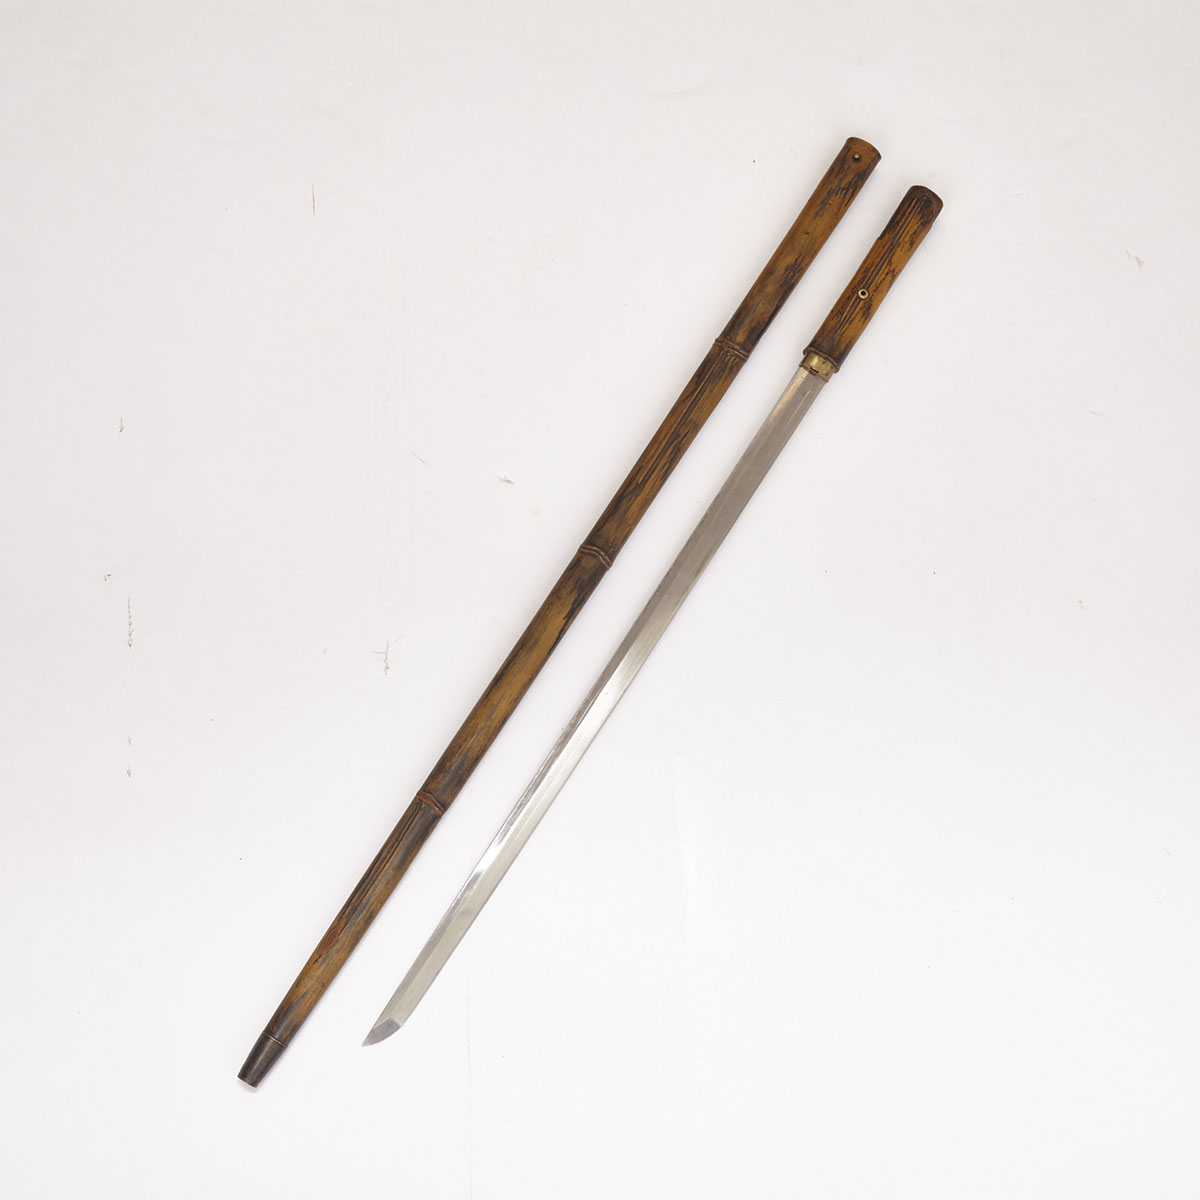 Japanese Faux Bamboo Sword Gadget Cane, early 20th century